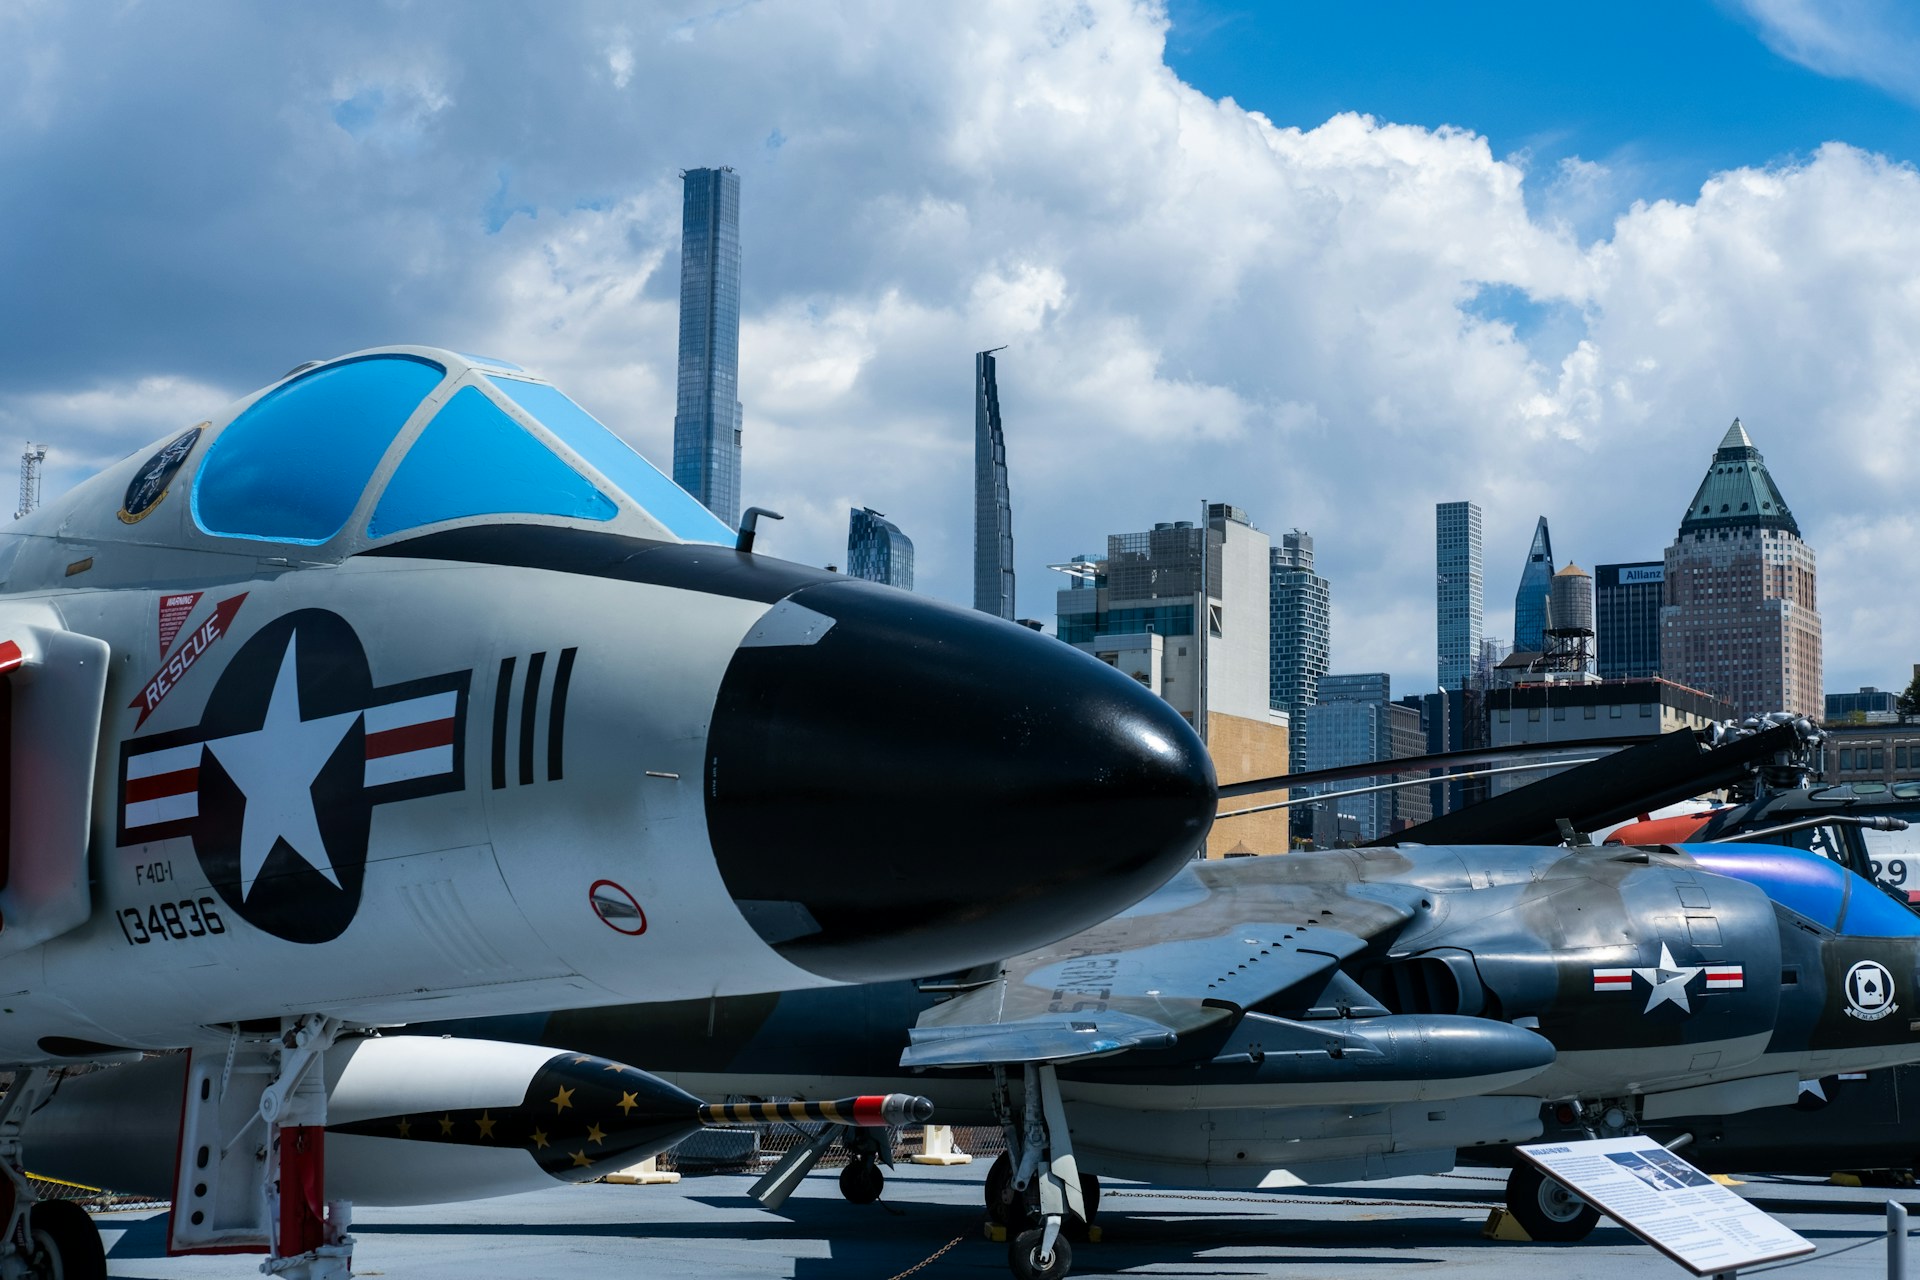 USS Intrepid Aircraft in NYC